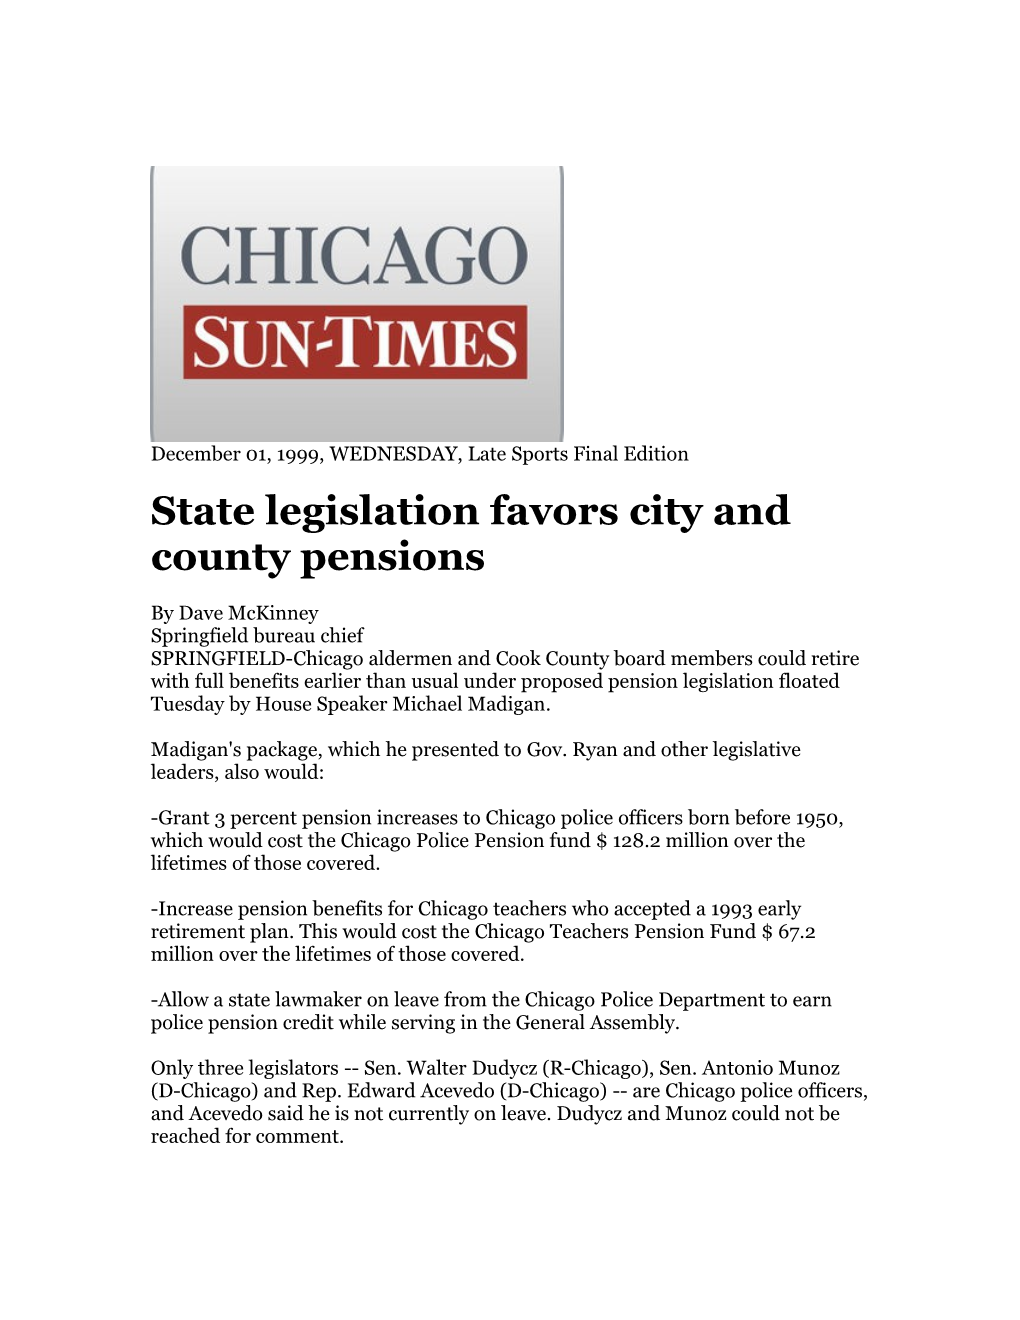 State Legislation Favors City and County Pensions